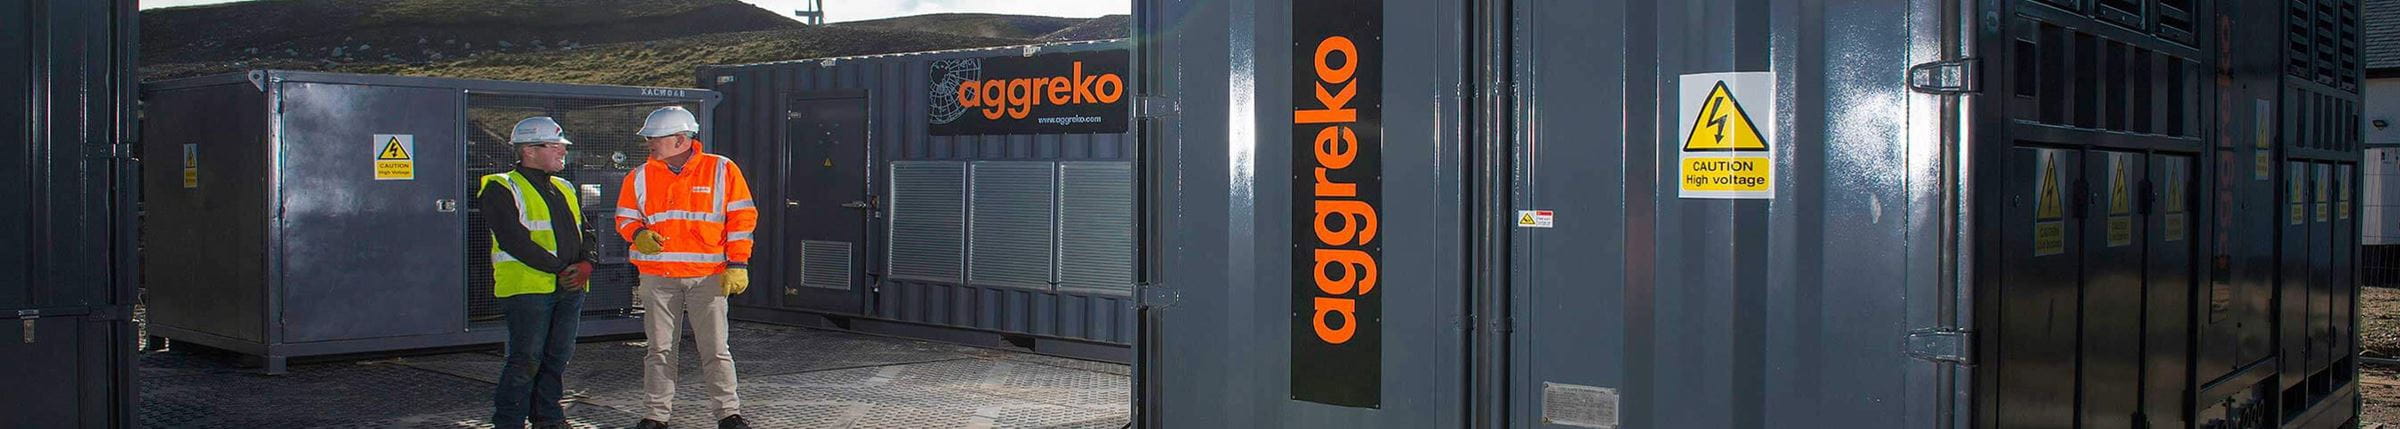 Two engineers standing beside Aggreko equipment in full safety regalia